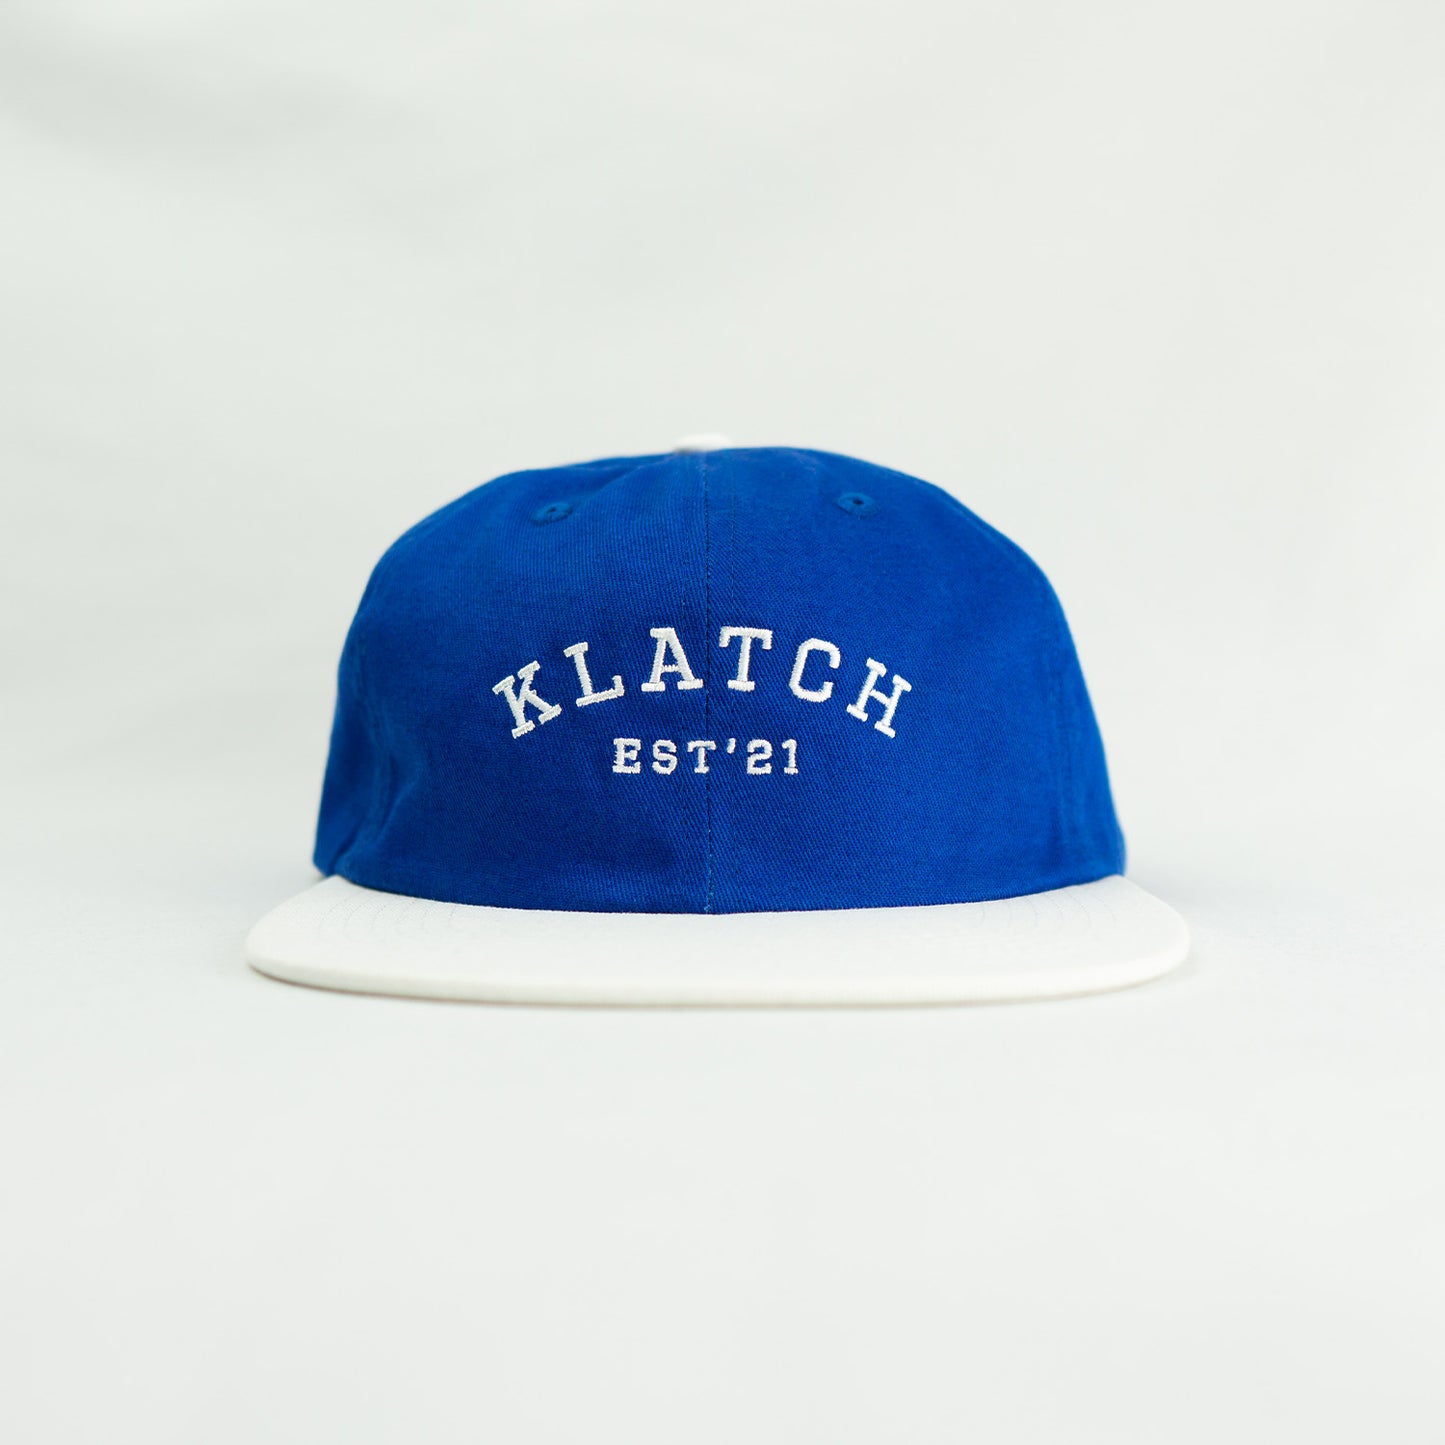 klatch co campbell snapback cap in navy and white front view